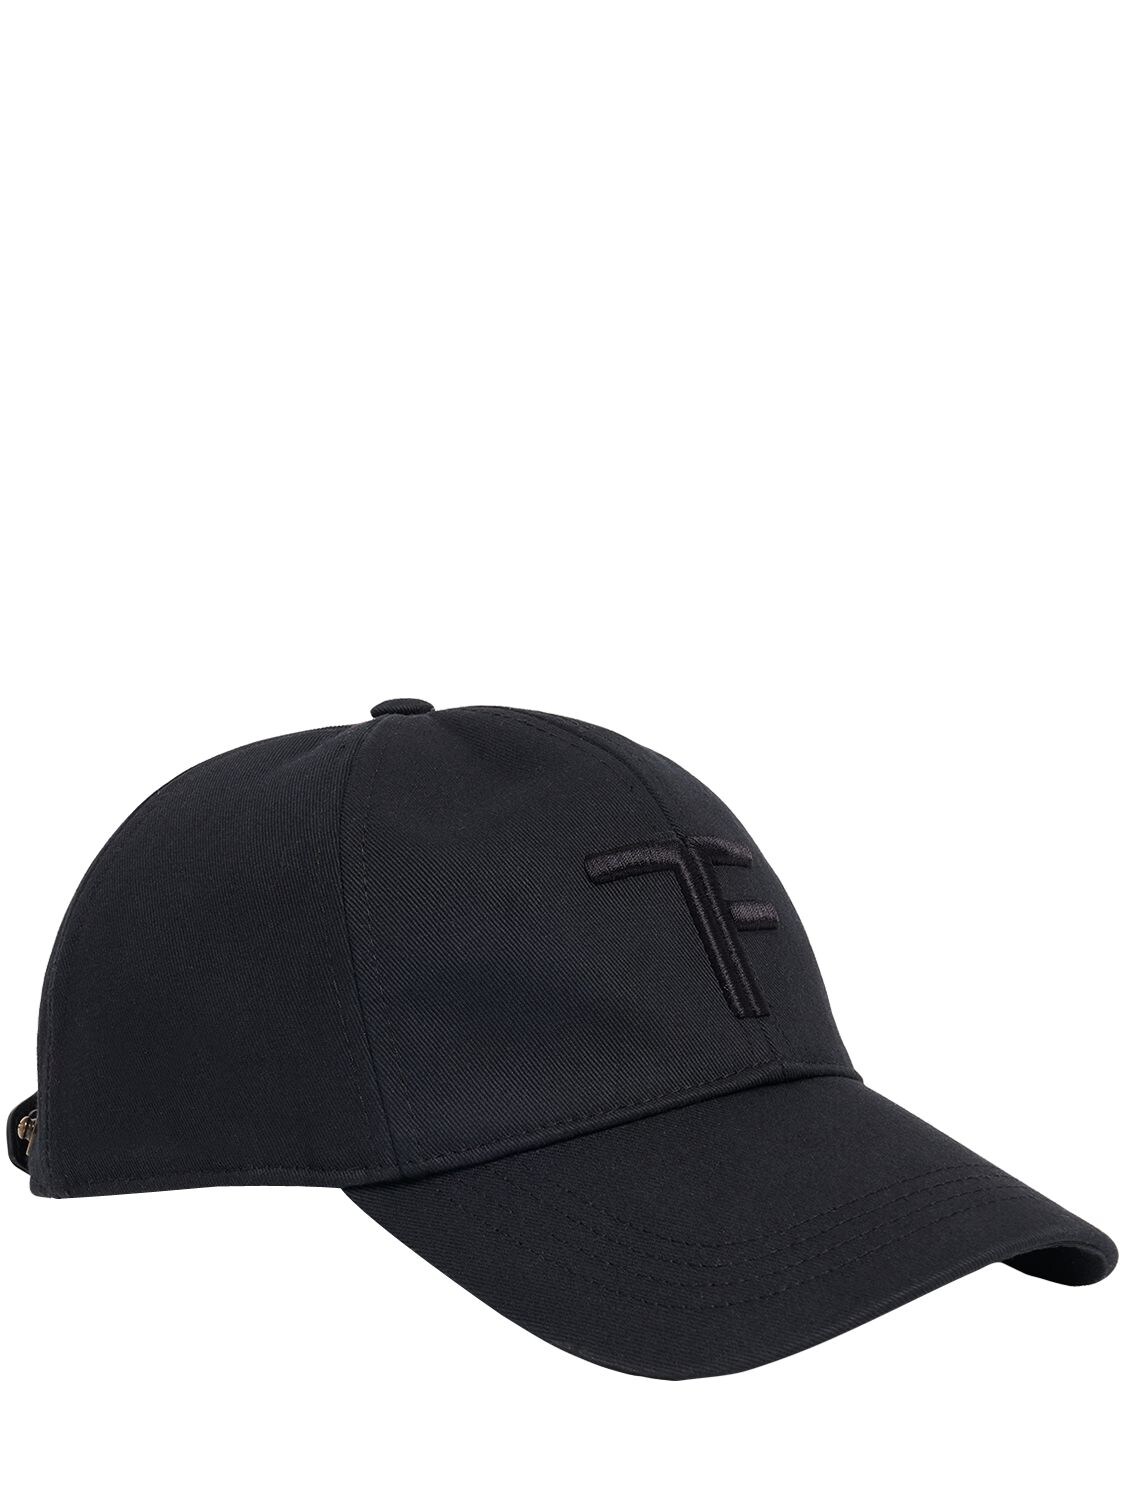 Shop Tom Ford Canvas & Smooth Leather Cap In Black